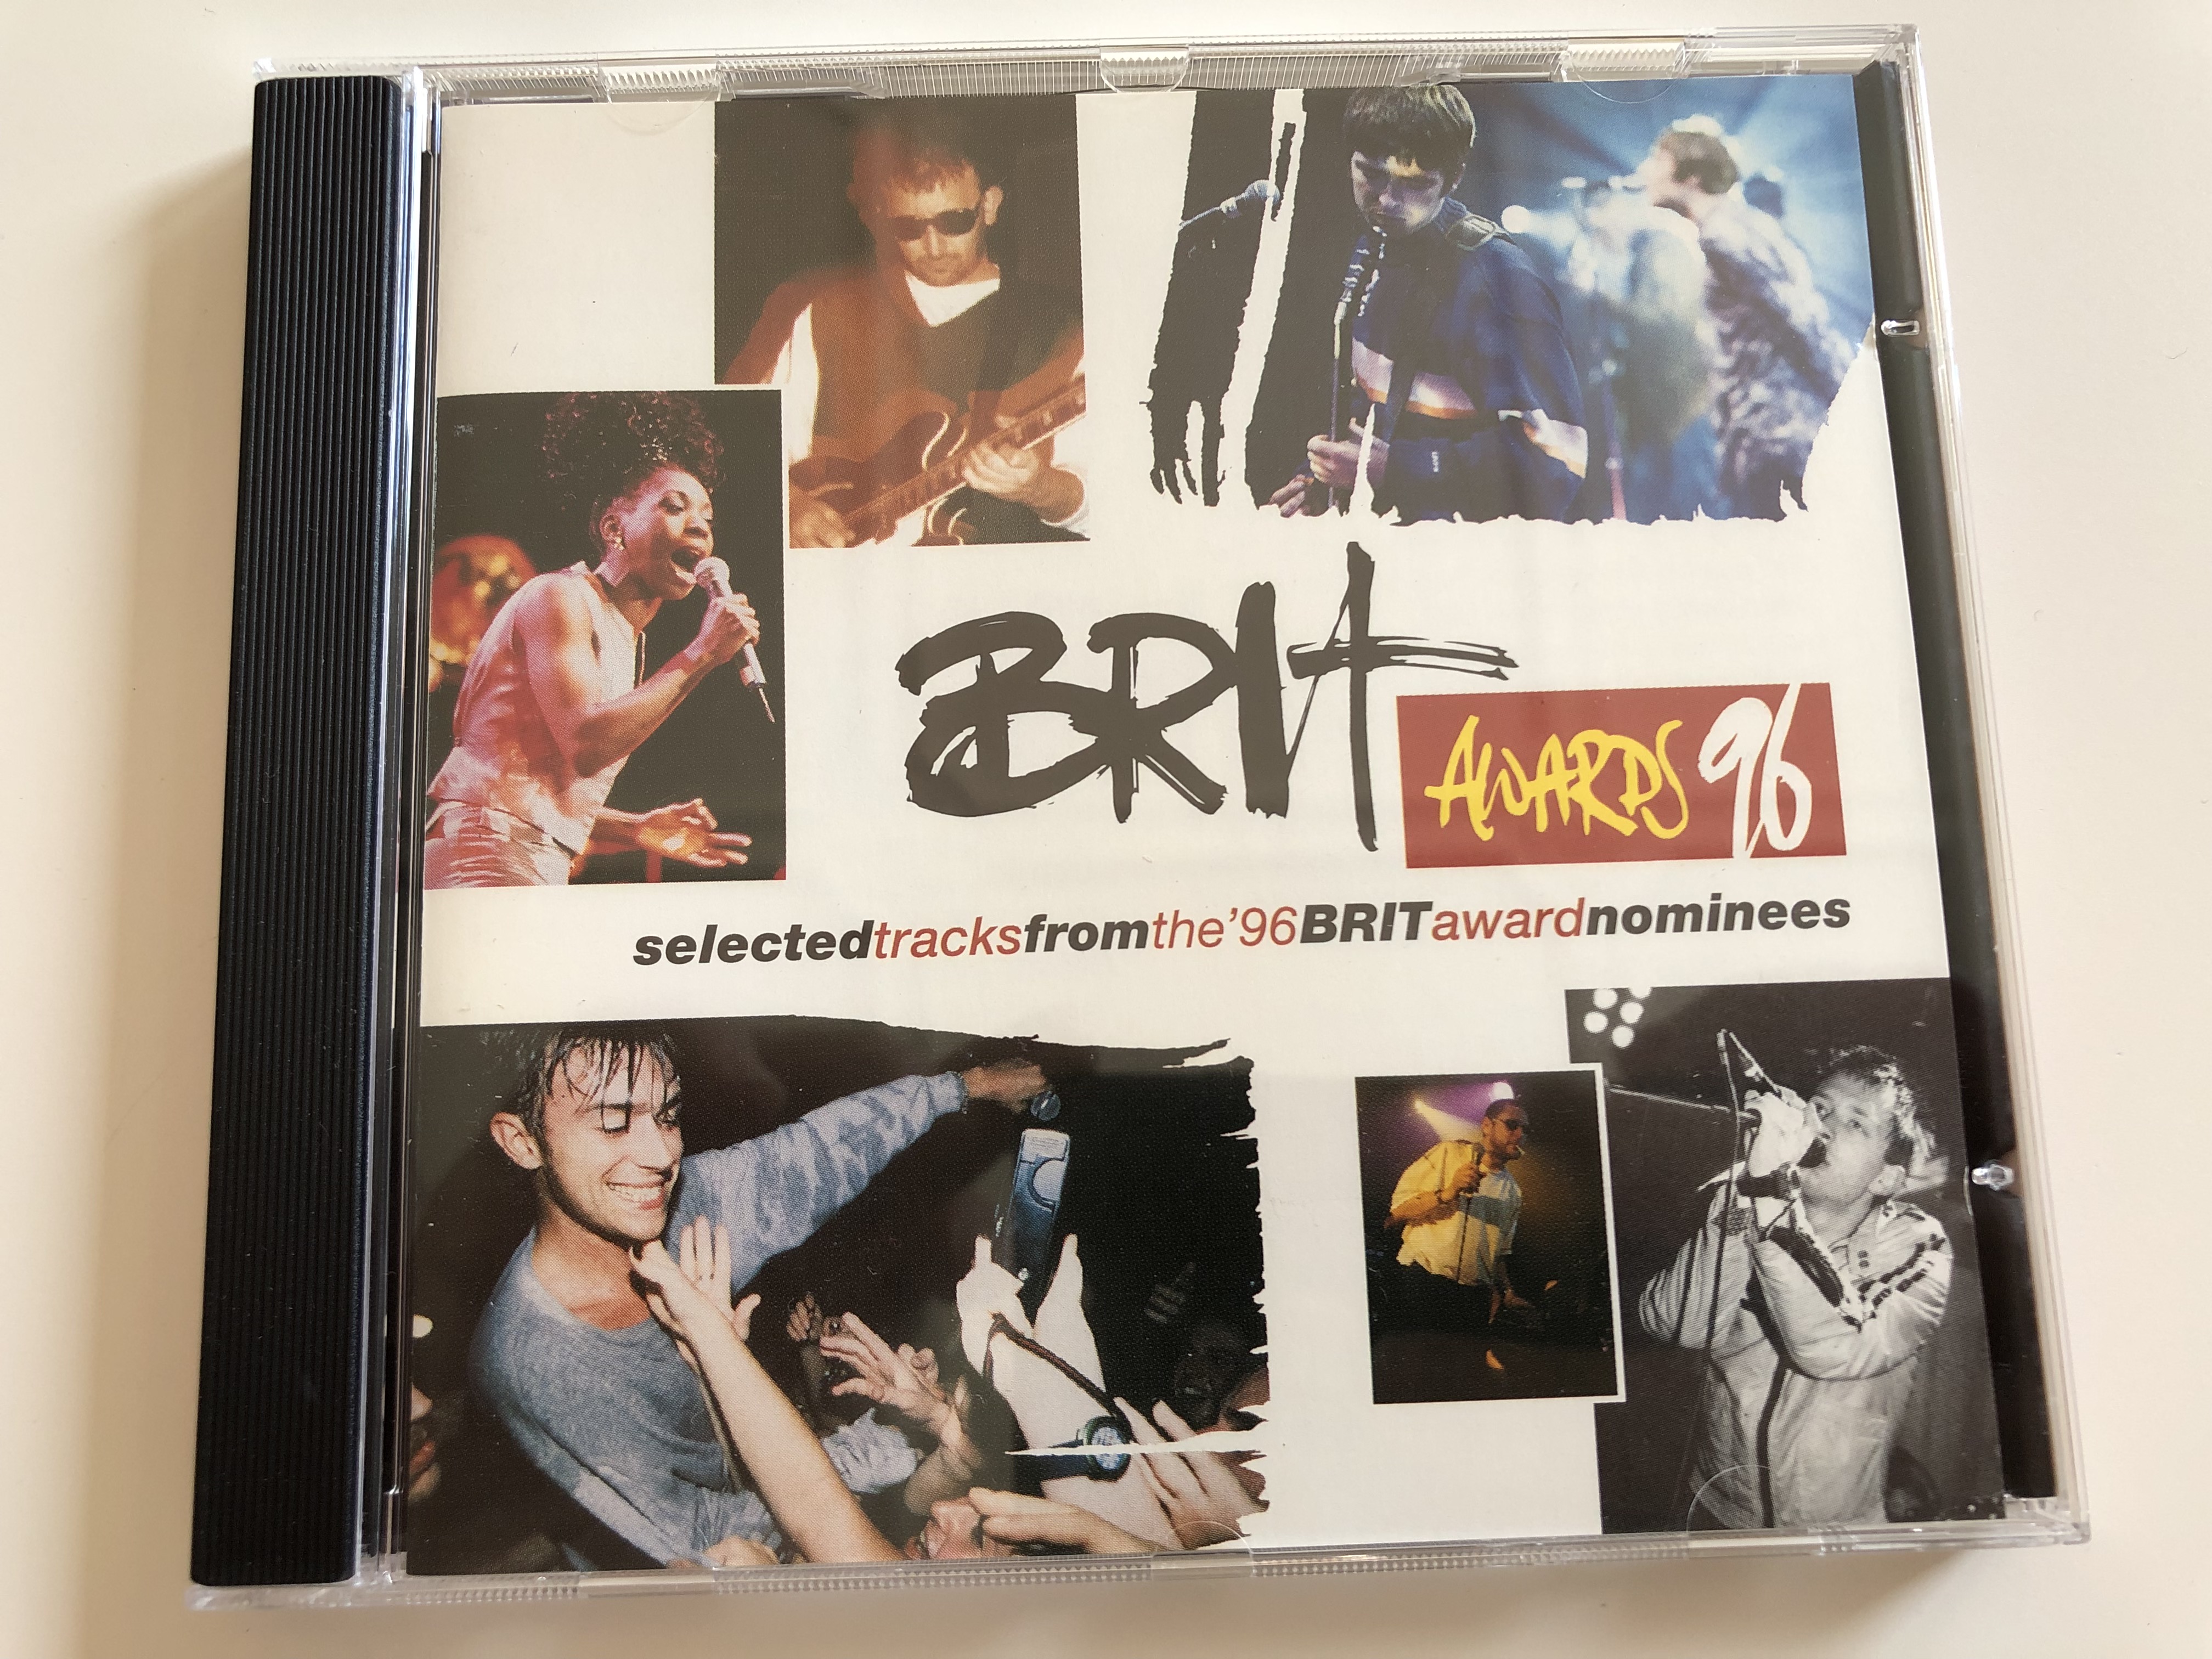 brit-awards-96-selected-tracks-from-the-96-brit-award-nominees-columbia-audio-cd-1996-stereo-483873-2-1-.jpg